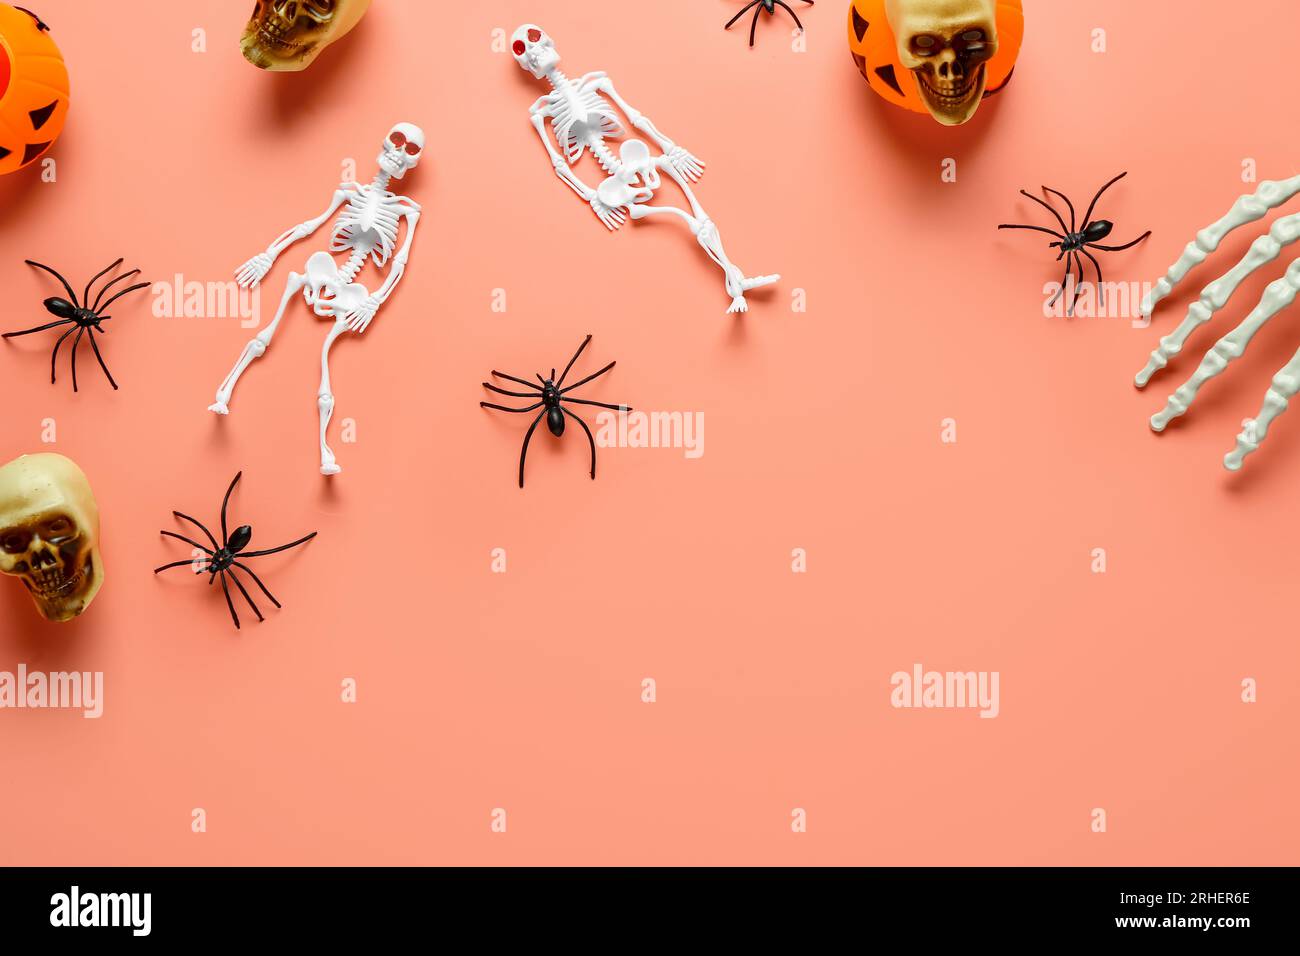 Composition with skeletons, hand, skulls, pumpkins and spiders for Halloween celebration on coral background Stock Photo